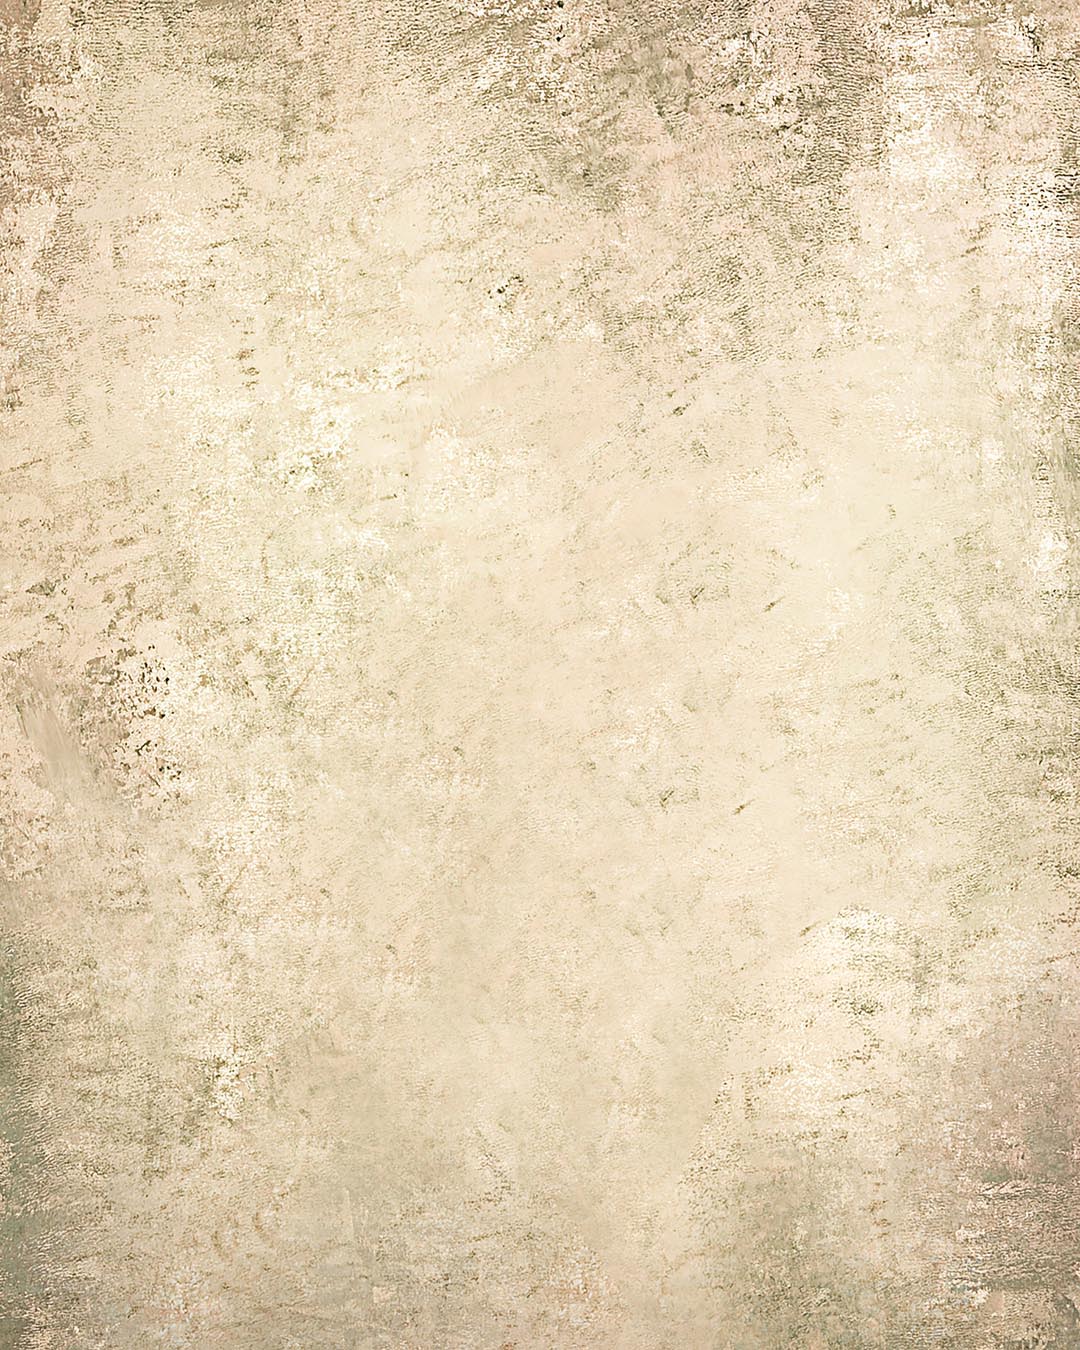 Kate Abstract Texture Beige Backdrop Designed by Kate Image